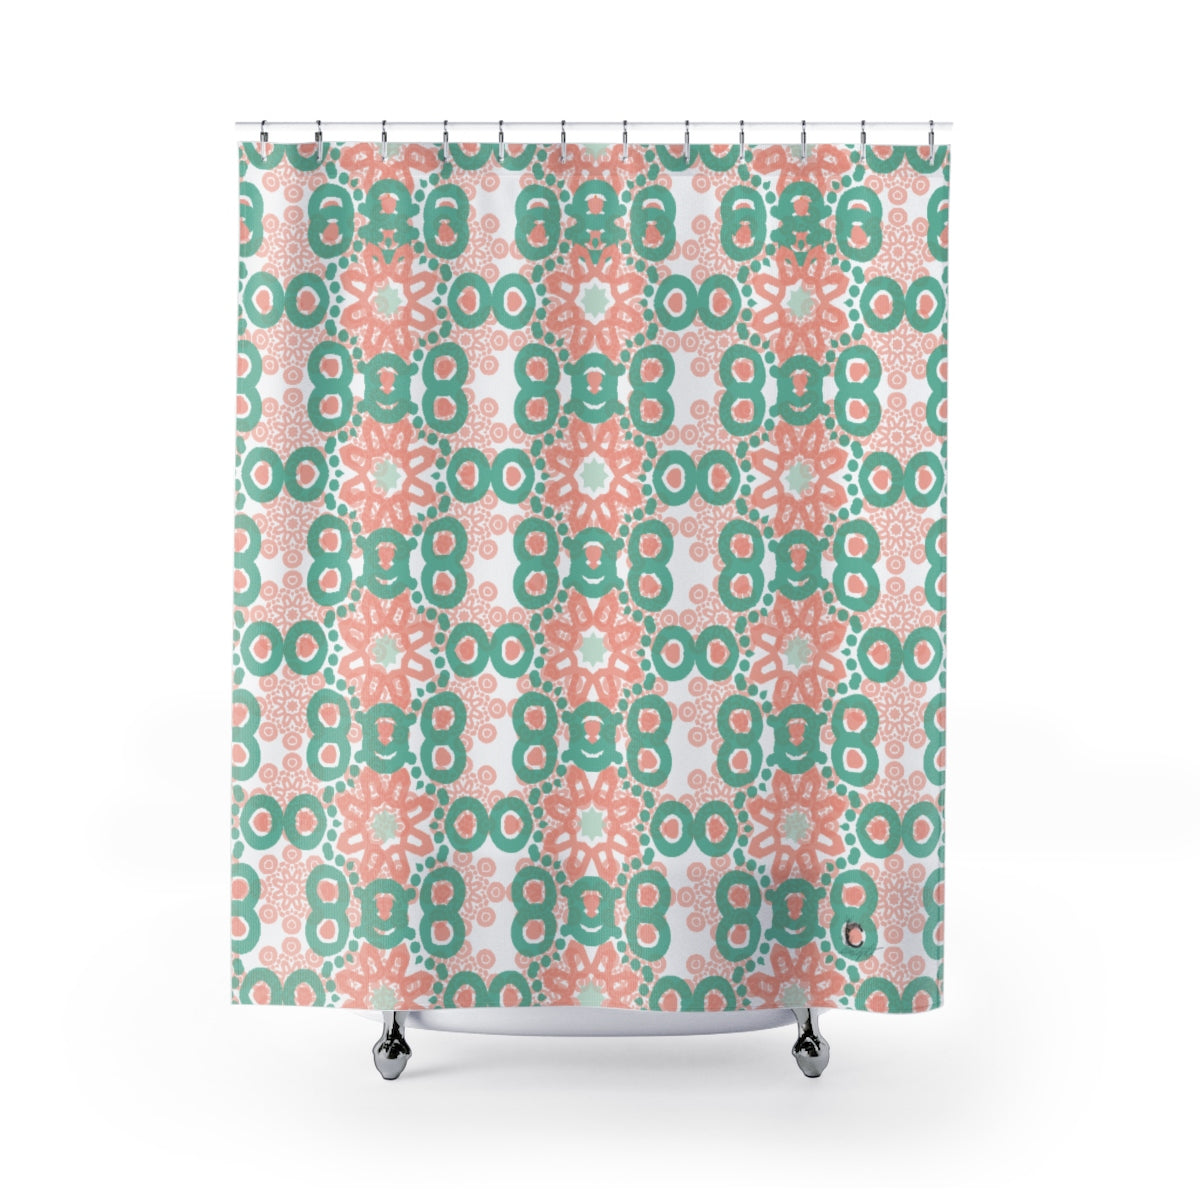 Tranquil Shower Curtain print